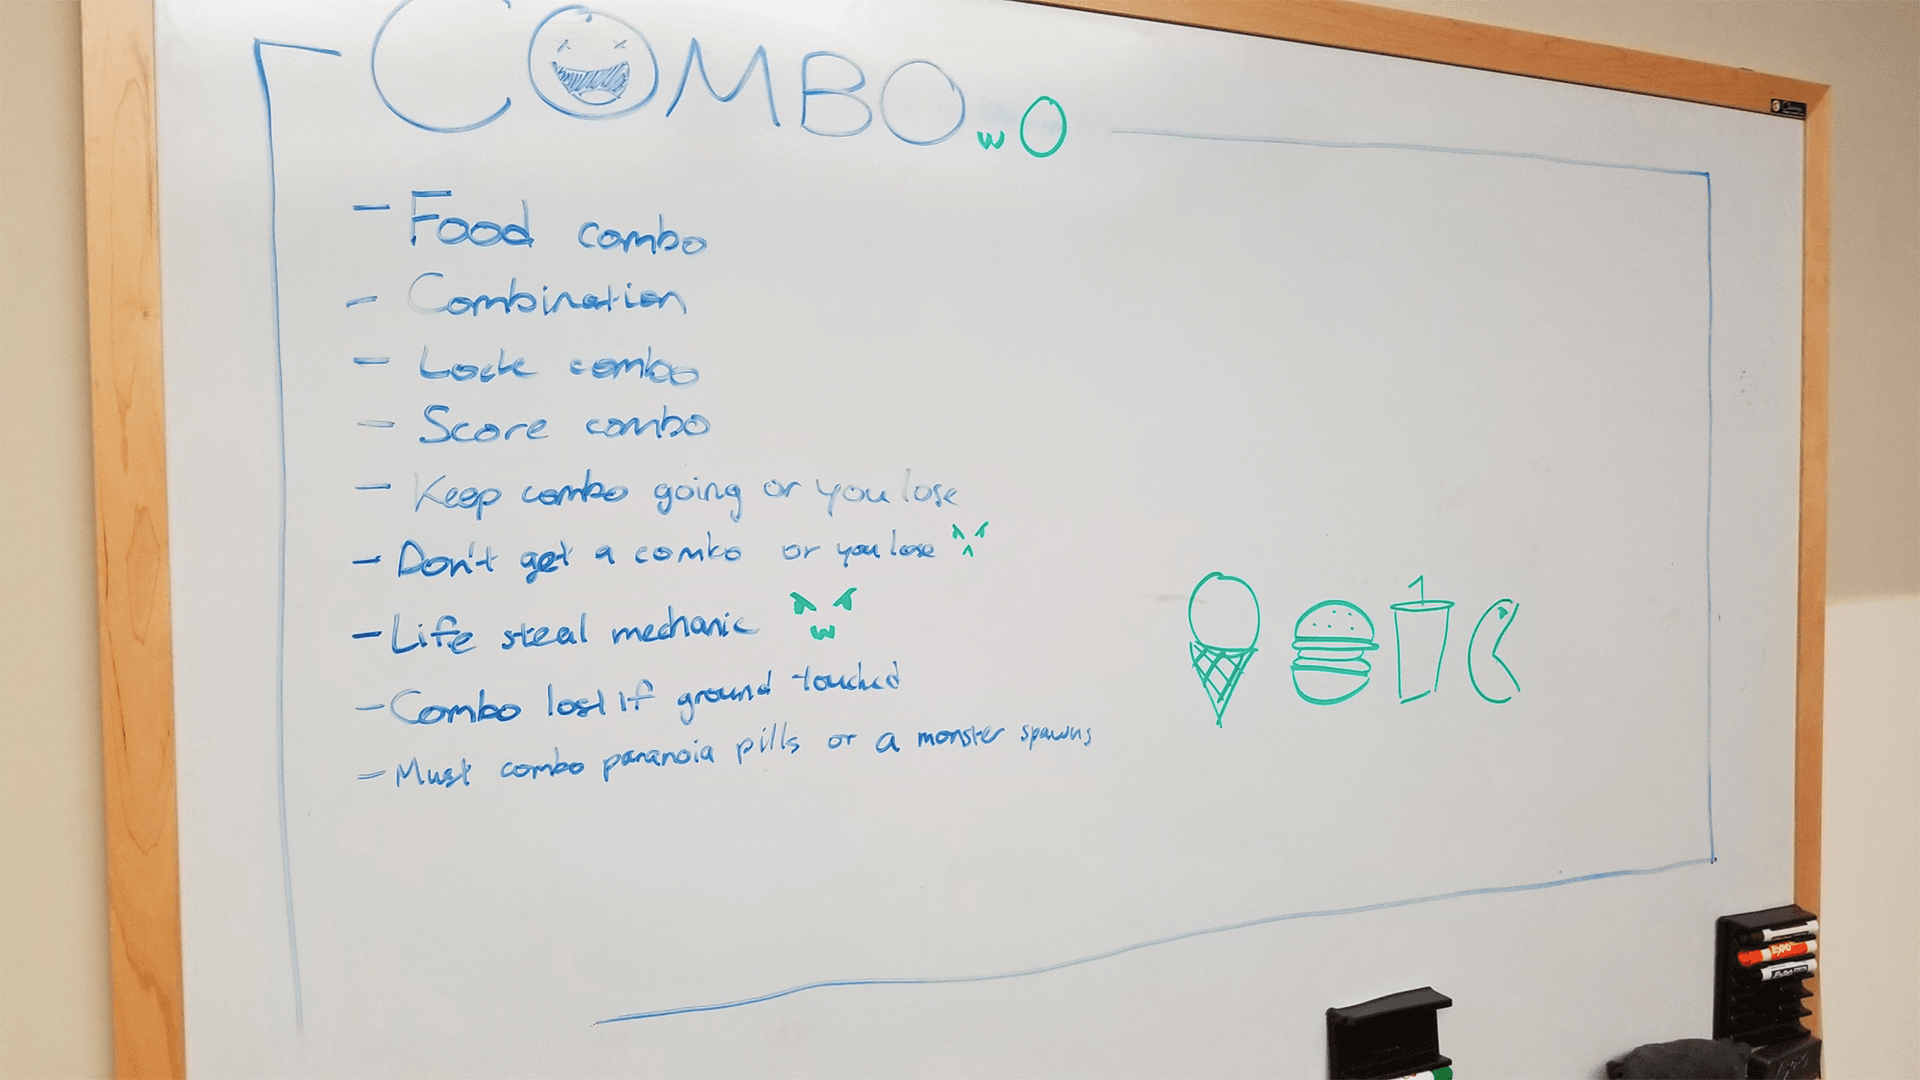 Whiteboard with brainstorming ideas